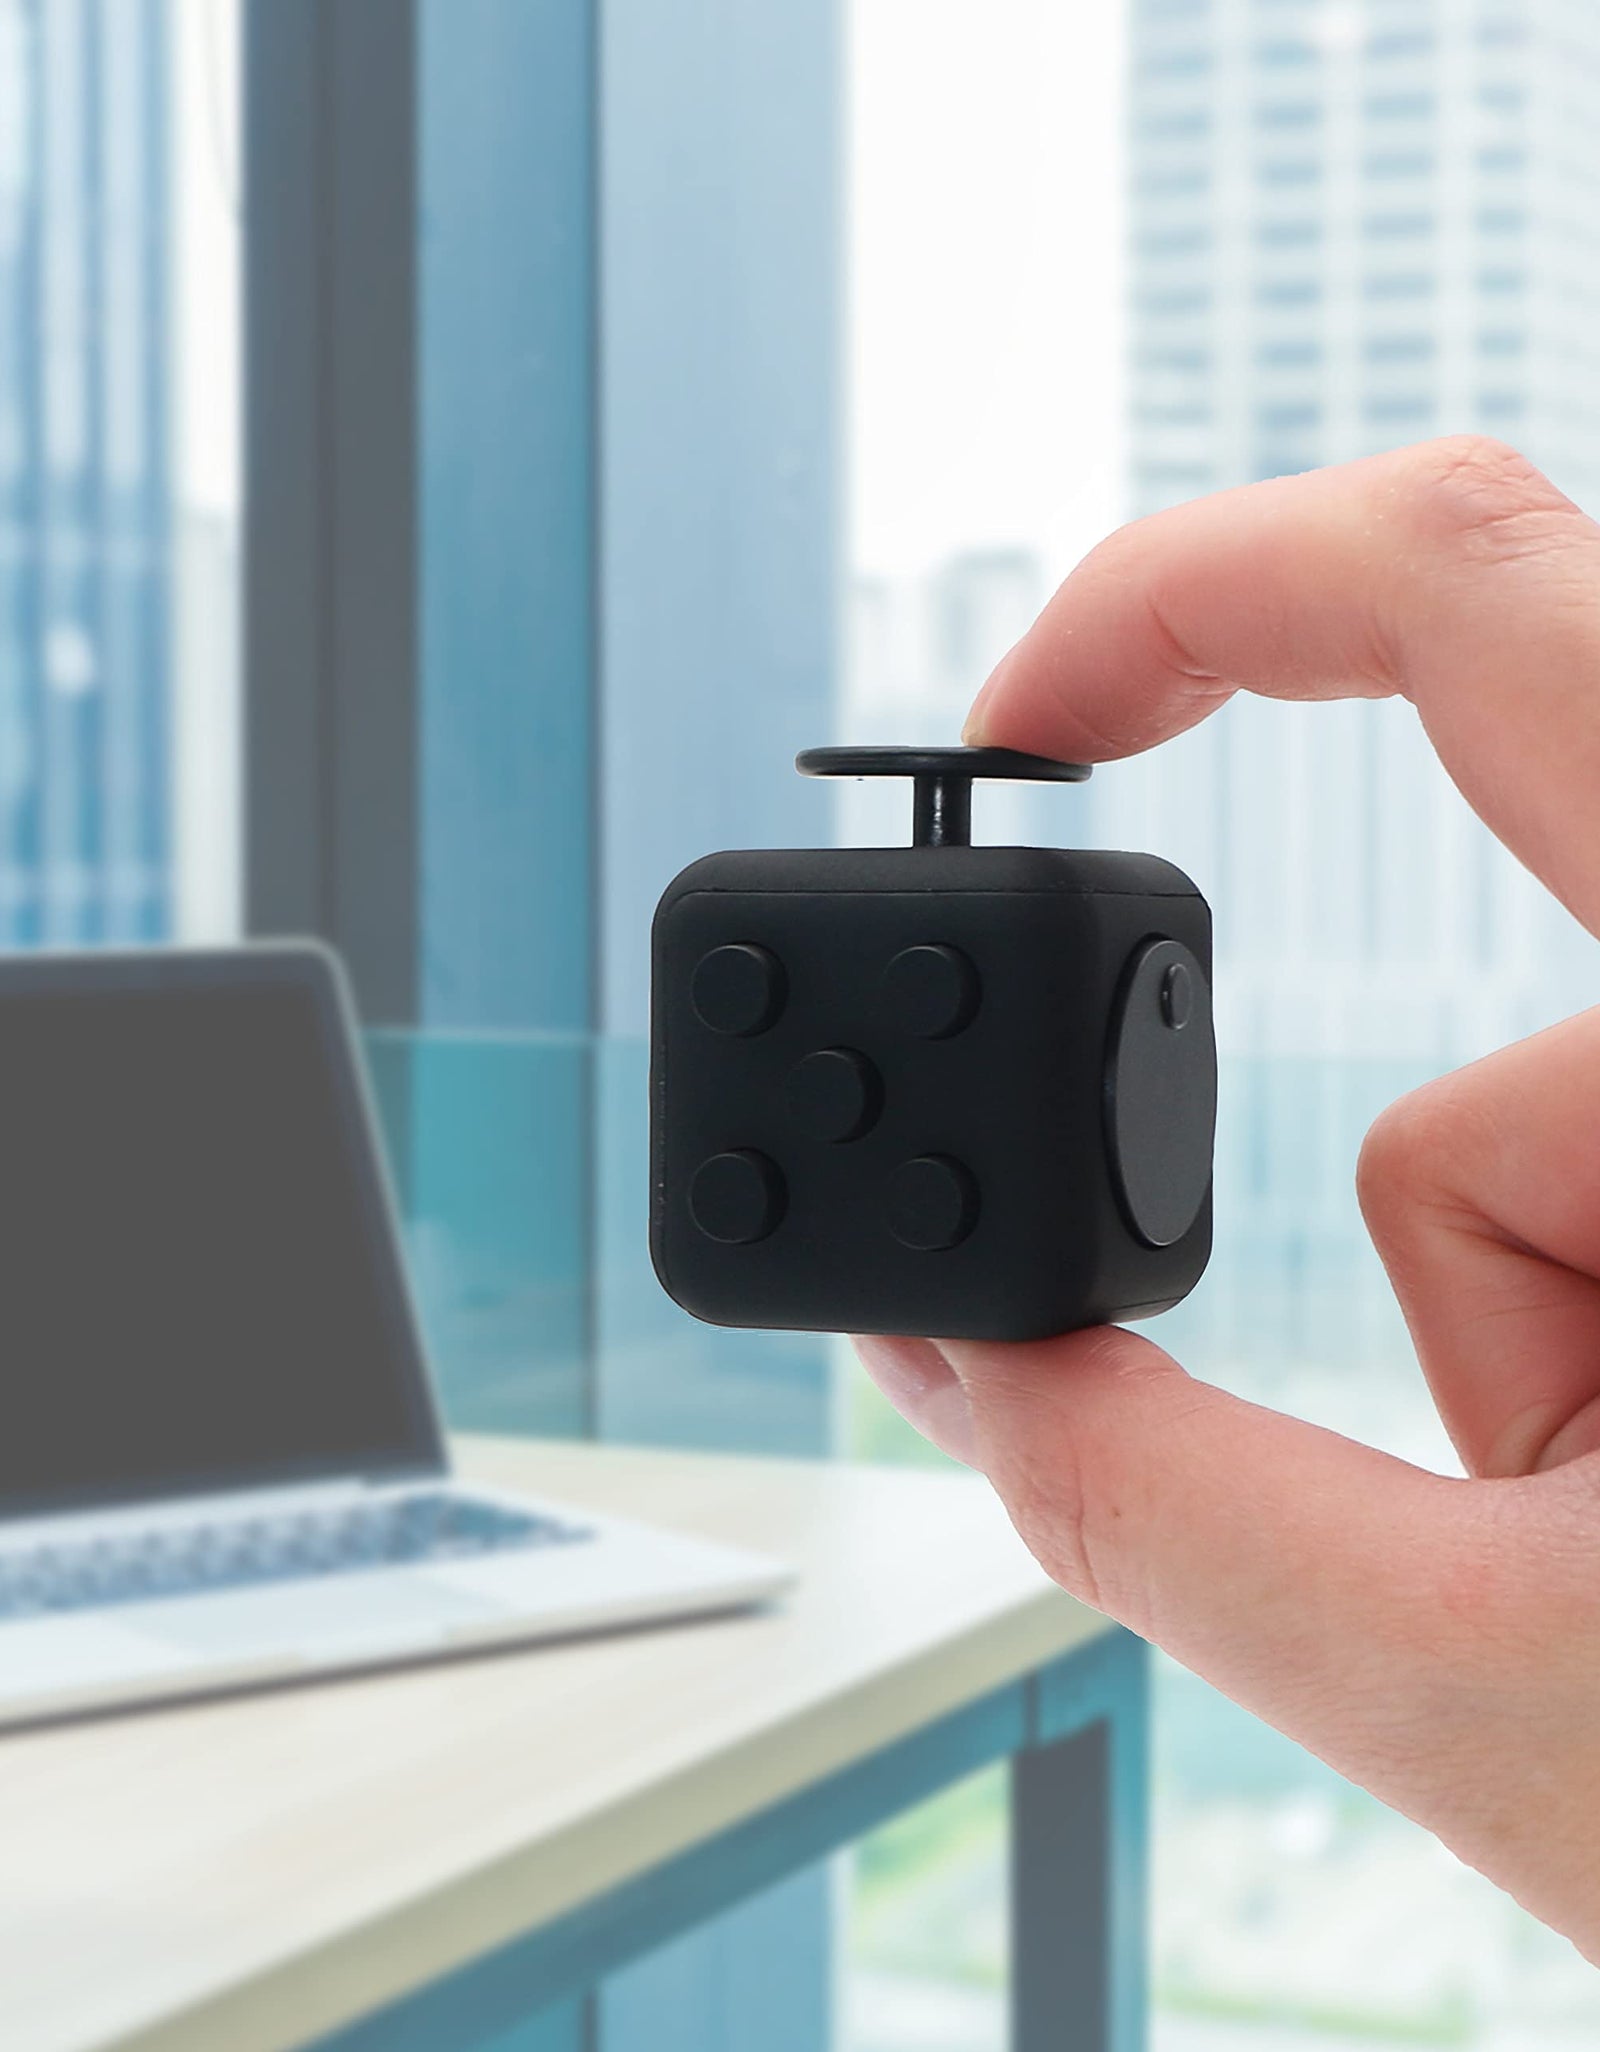 Appash Fidget Cube Stress Anxiety Pressure Relieving Toy Great for Adults and Children[Gift Idea][Relaxing Toy][Stress Reliever][Soft Material] (Black&Black)